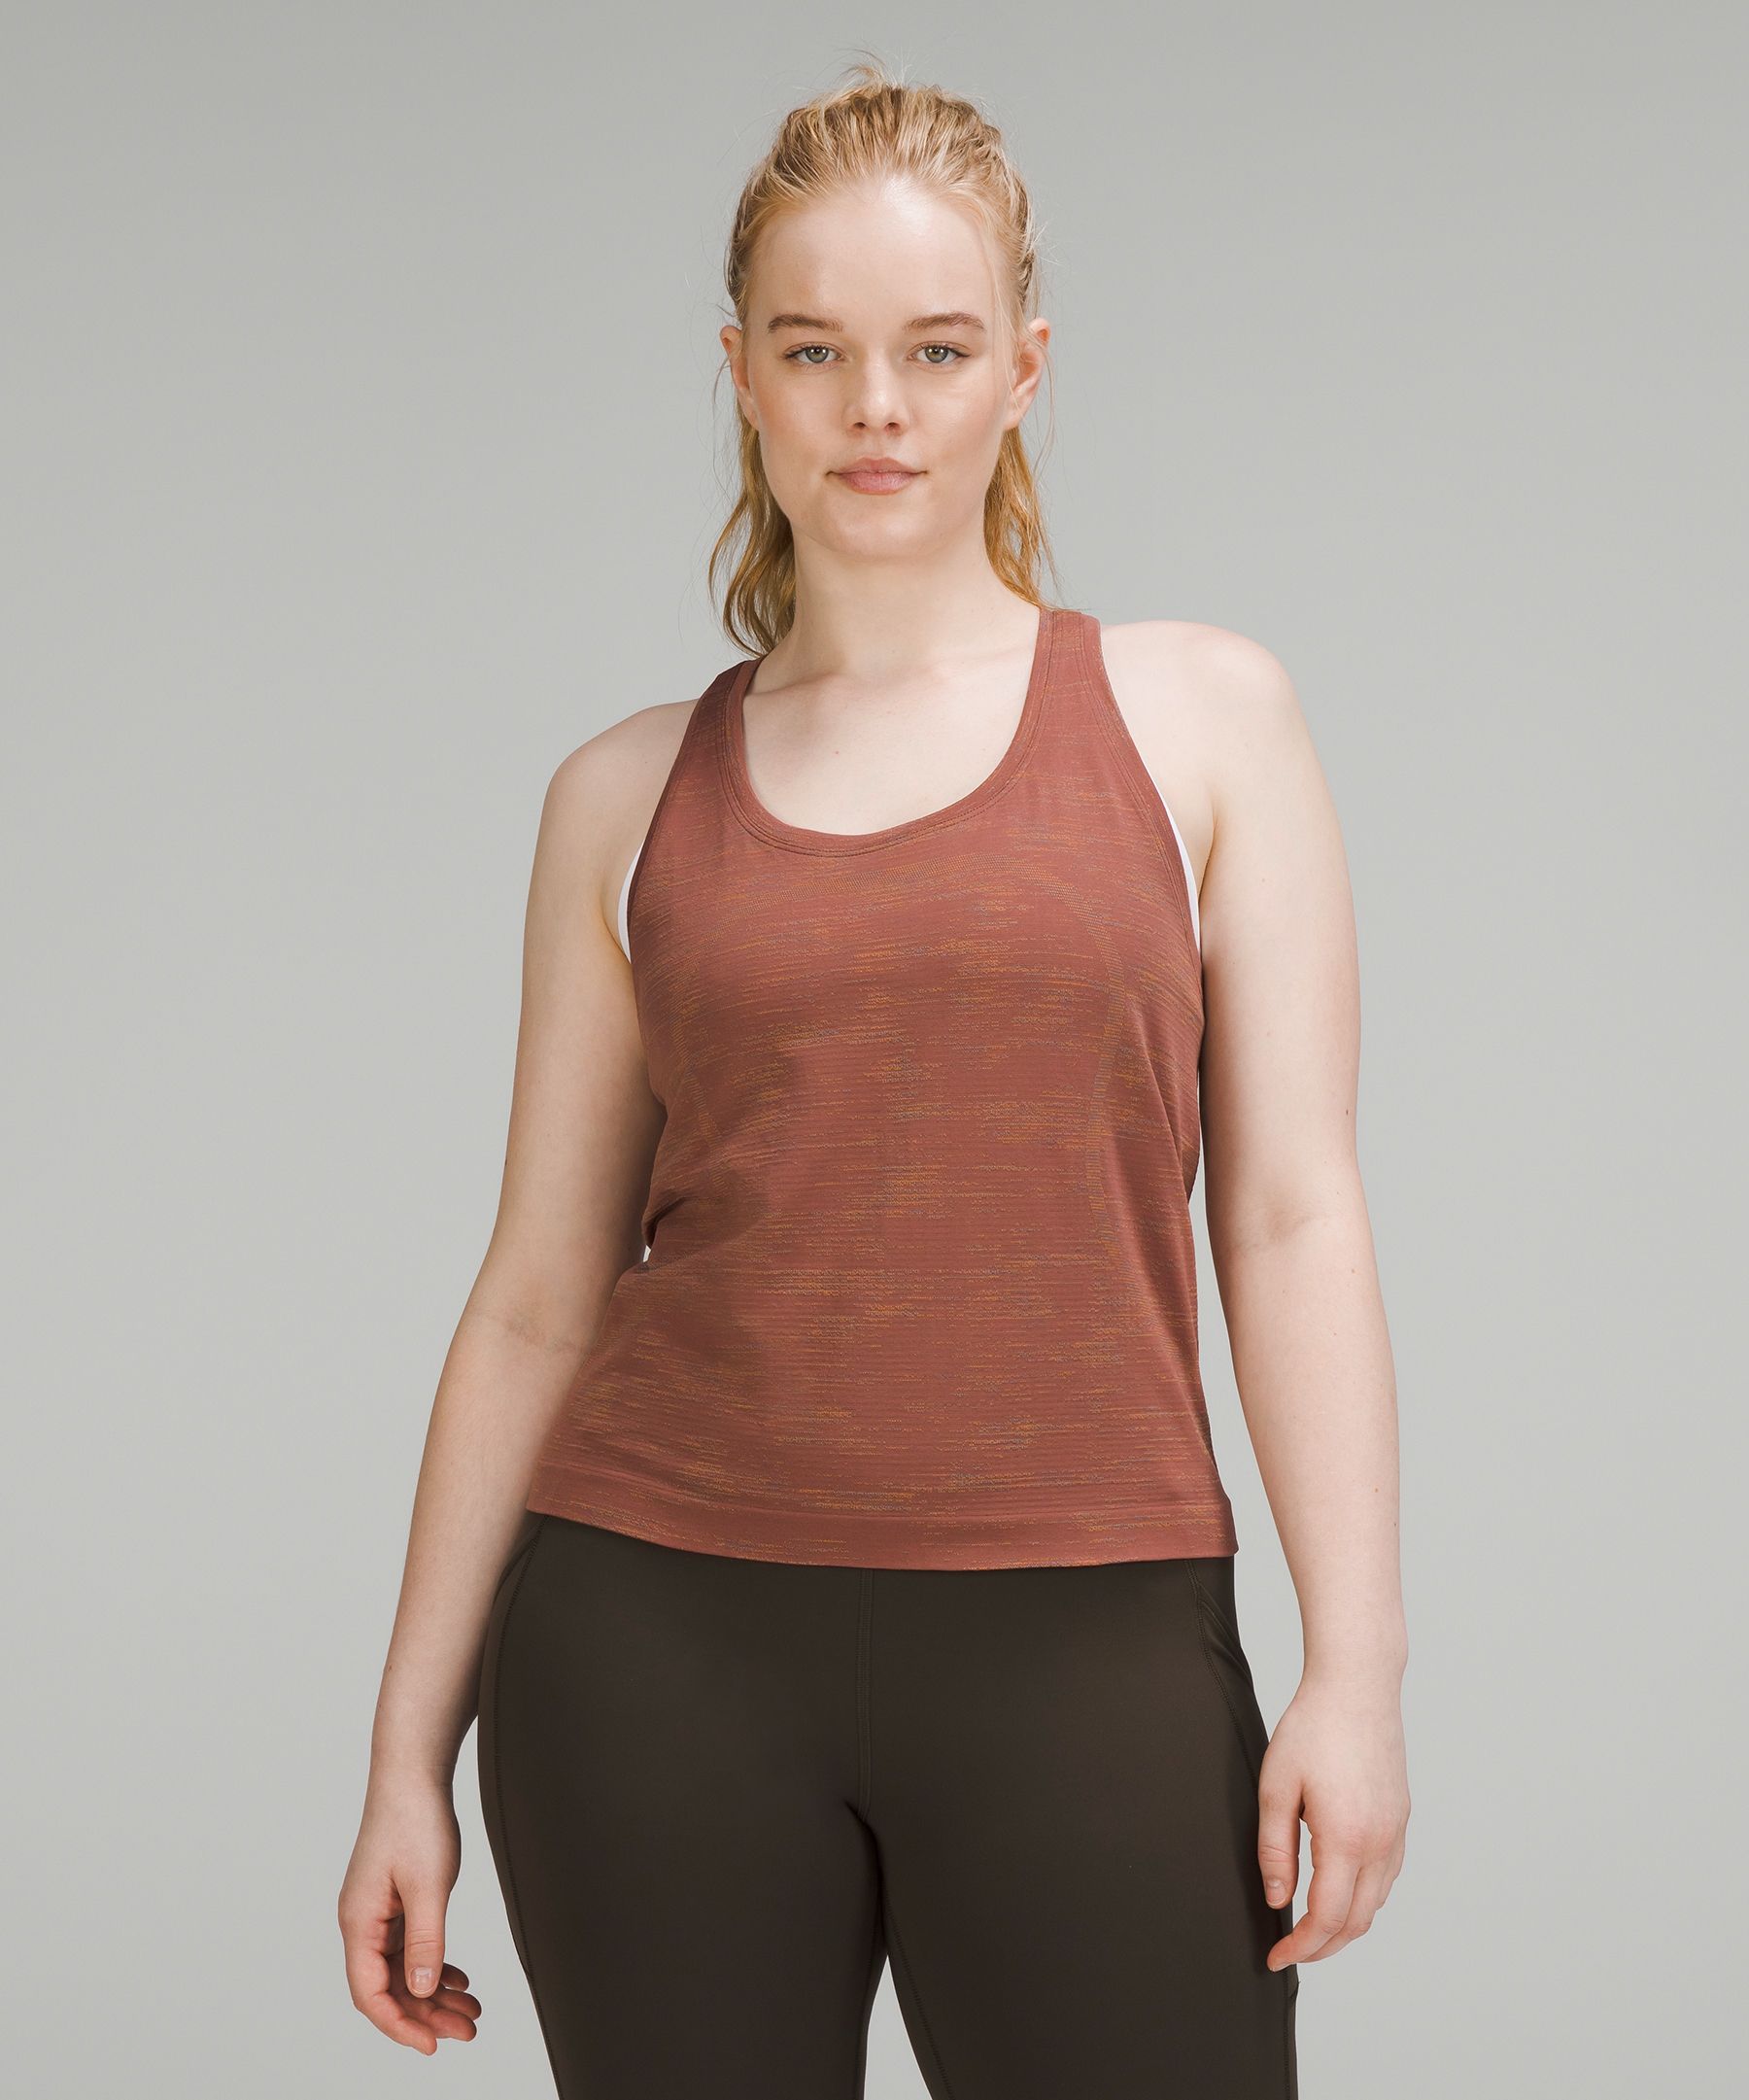 Lululemon Swiftly Tech Racerback Tank Top 2.0 Race Length In Chroma Check Ancient Copper/warm